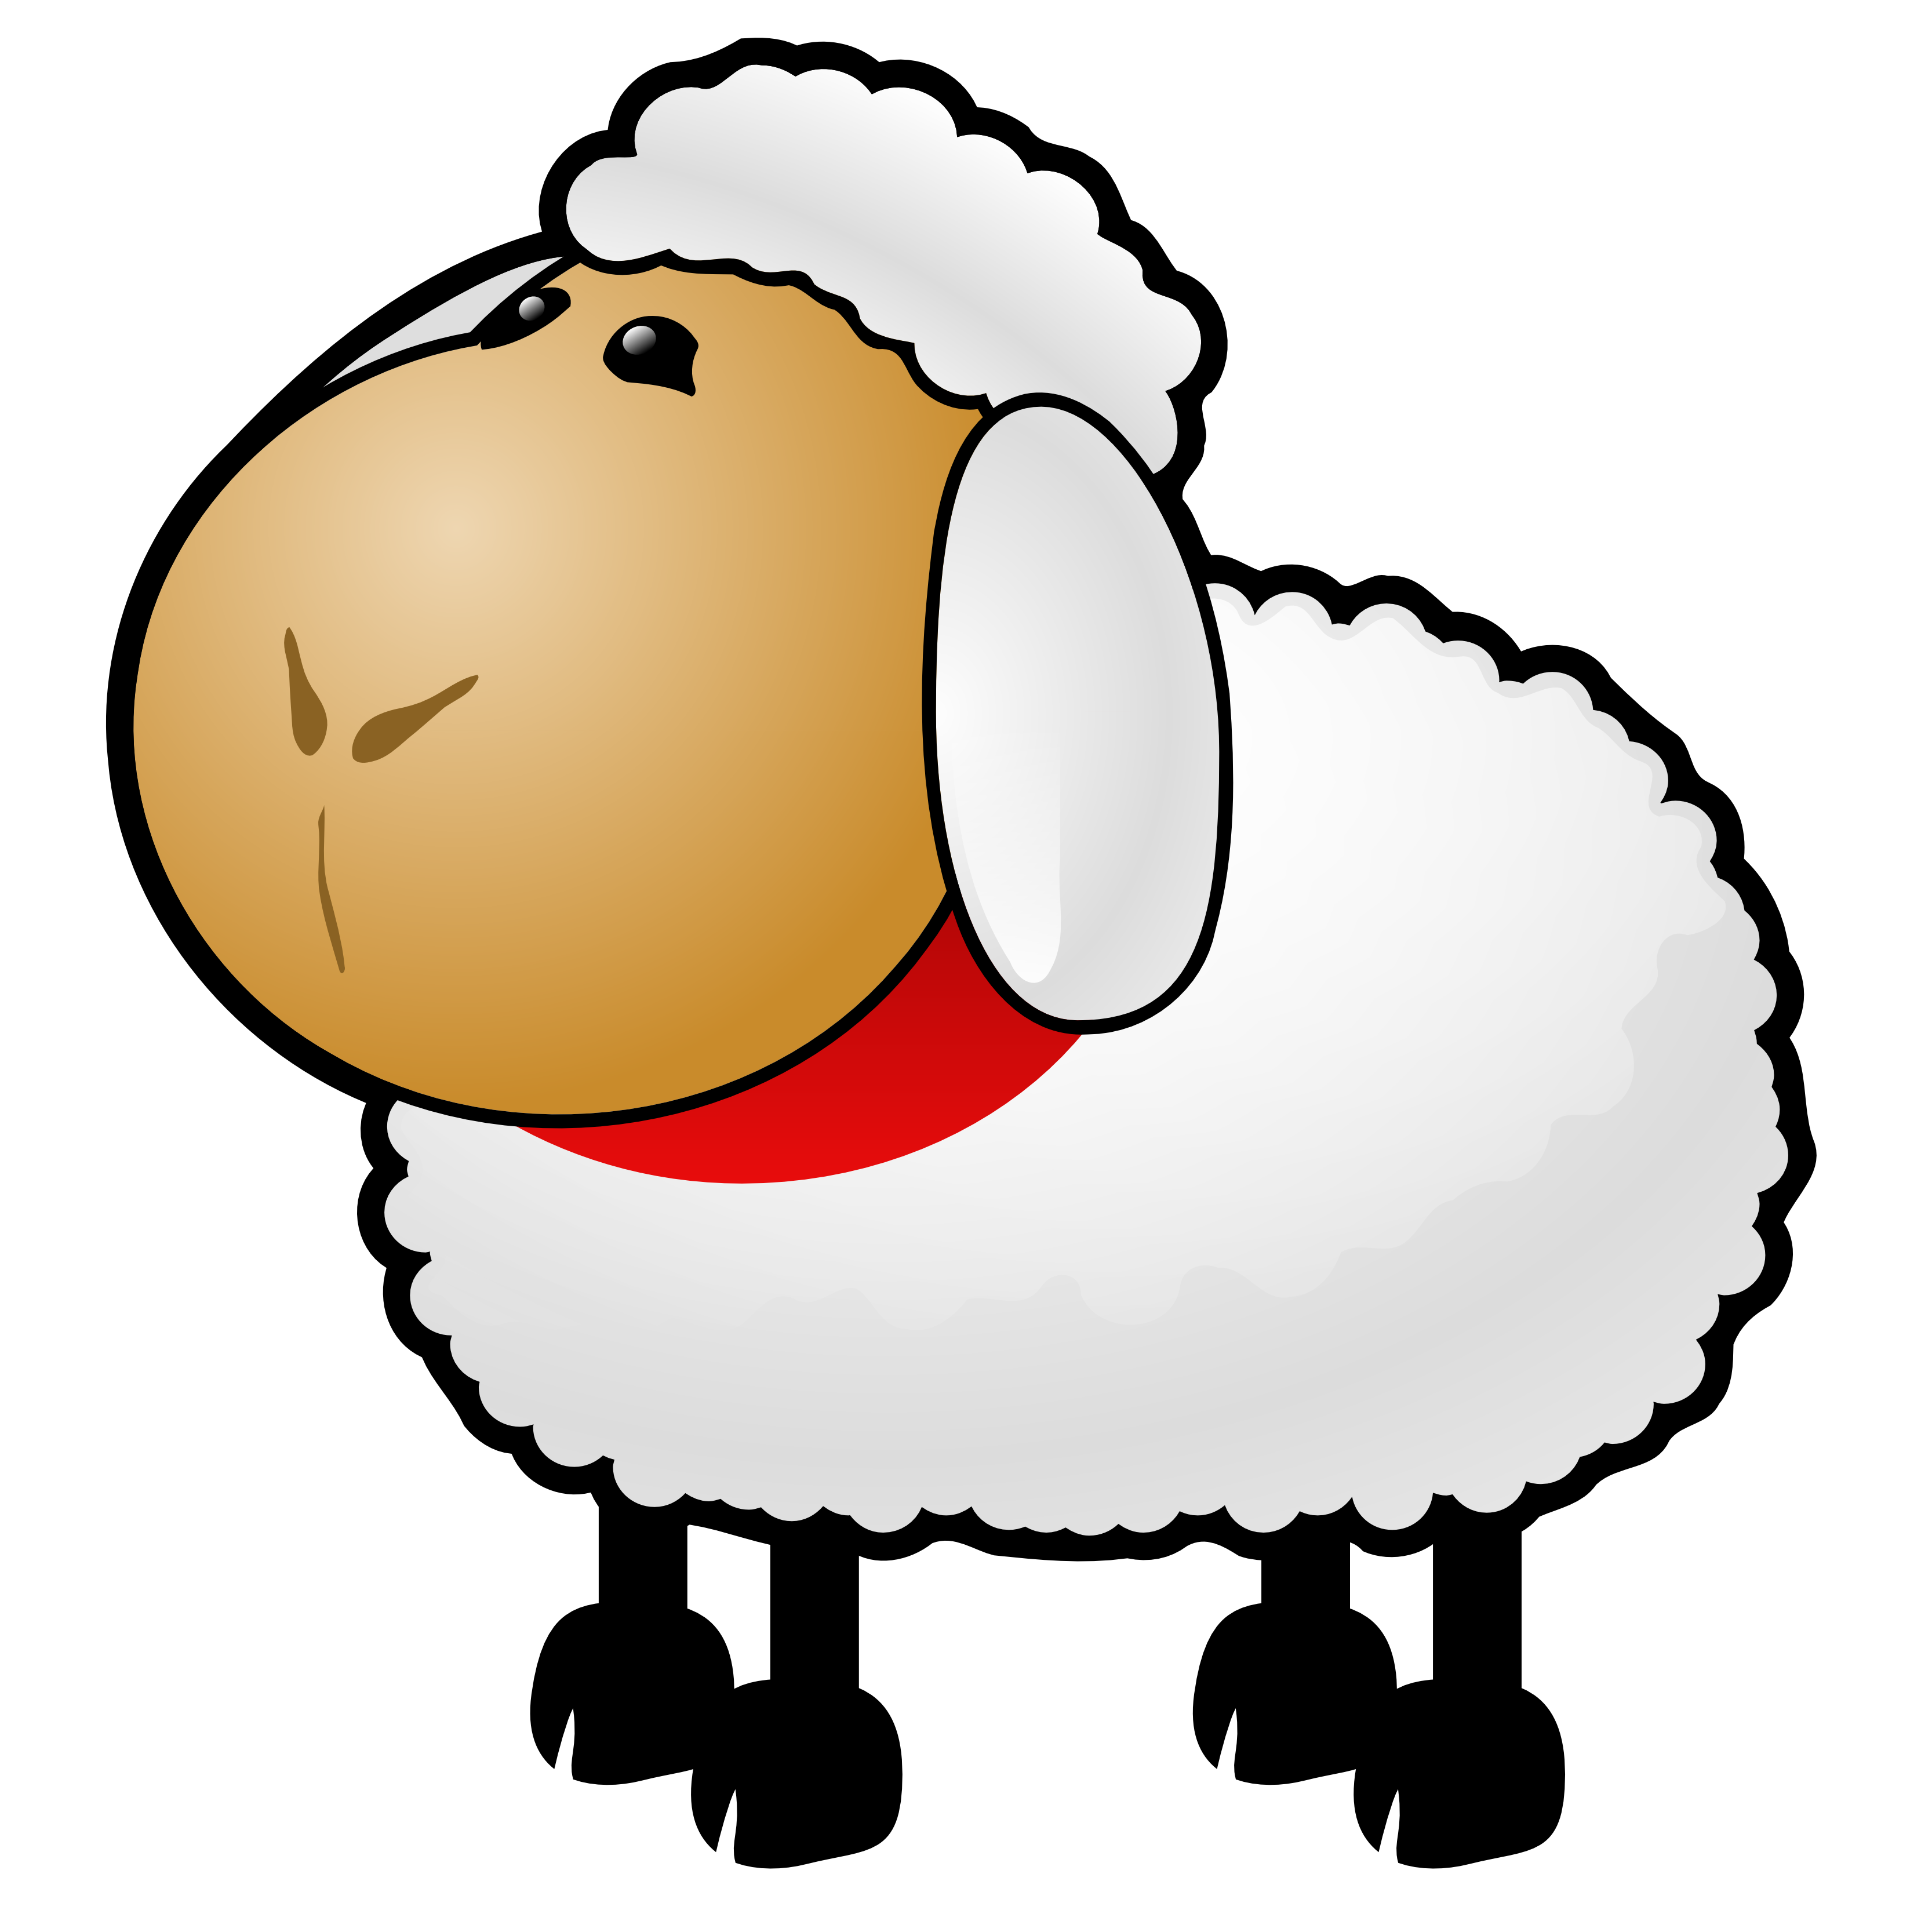 32 sheep clip art. | Clipart library - Free Clipart Images